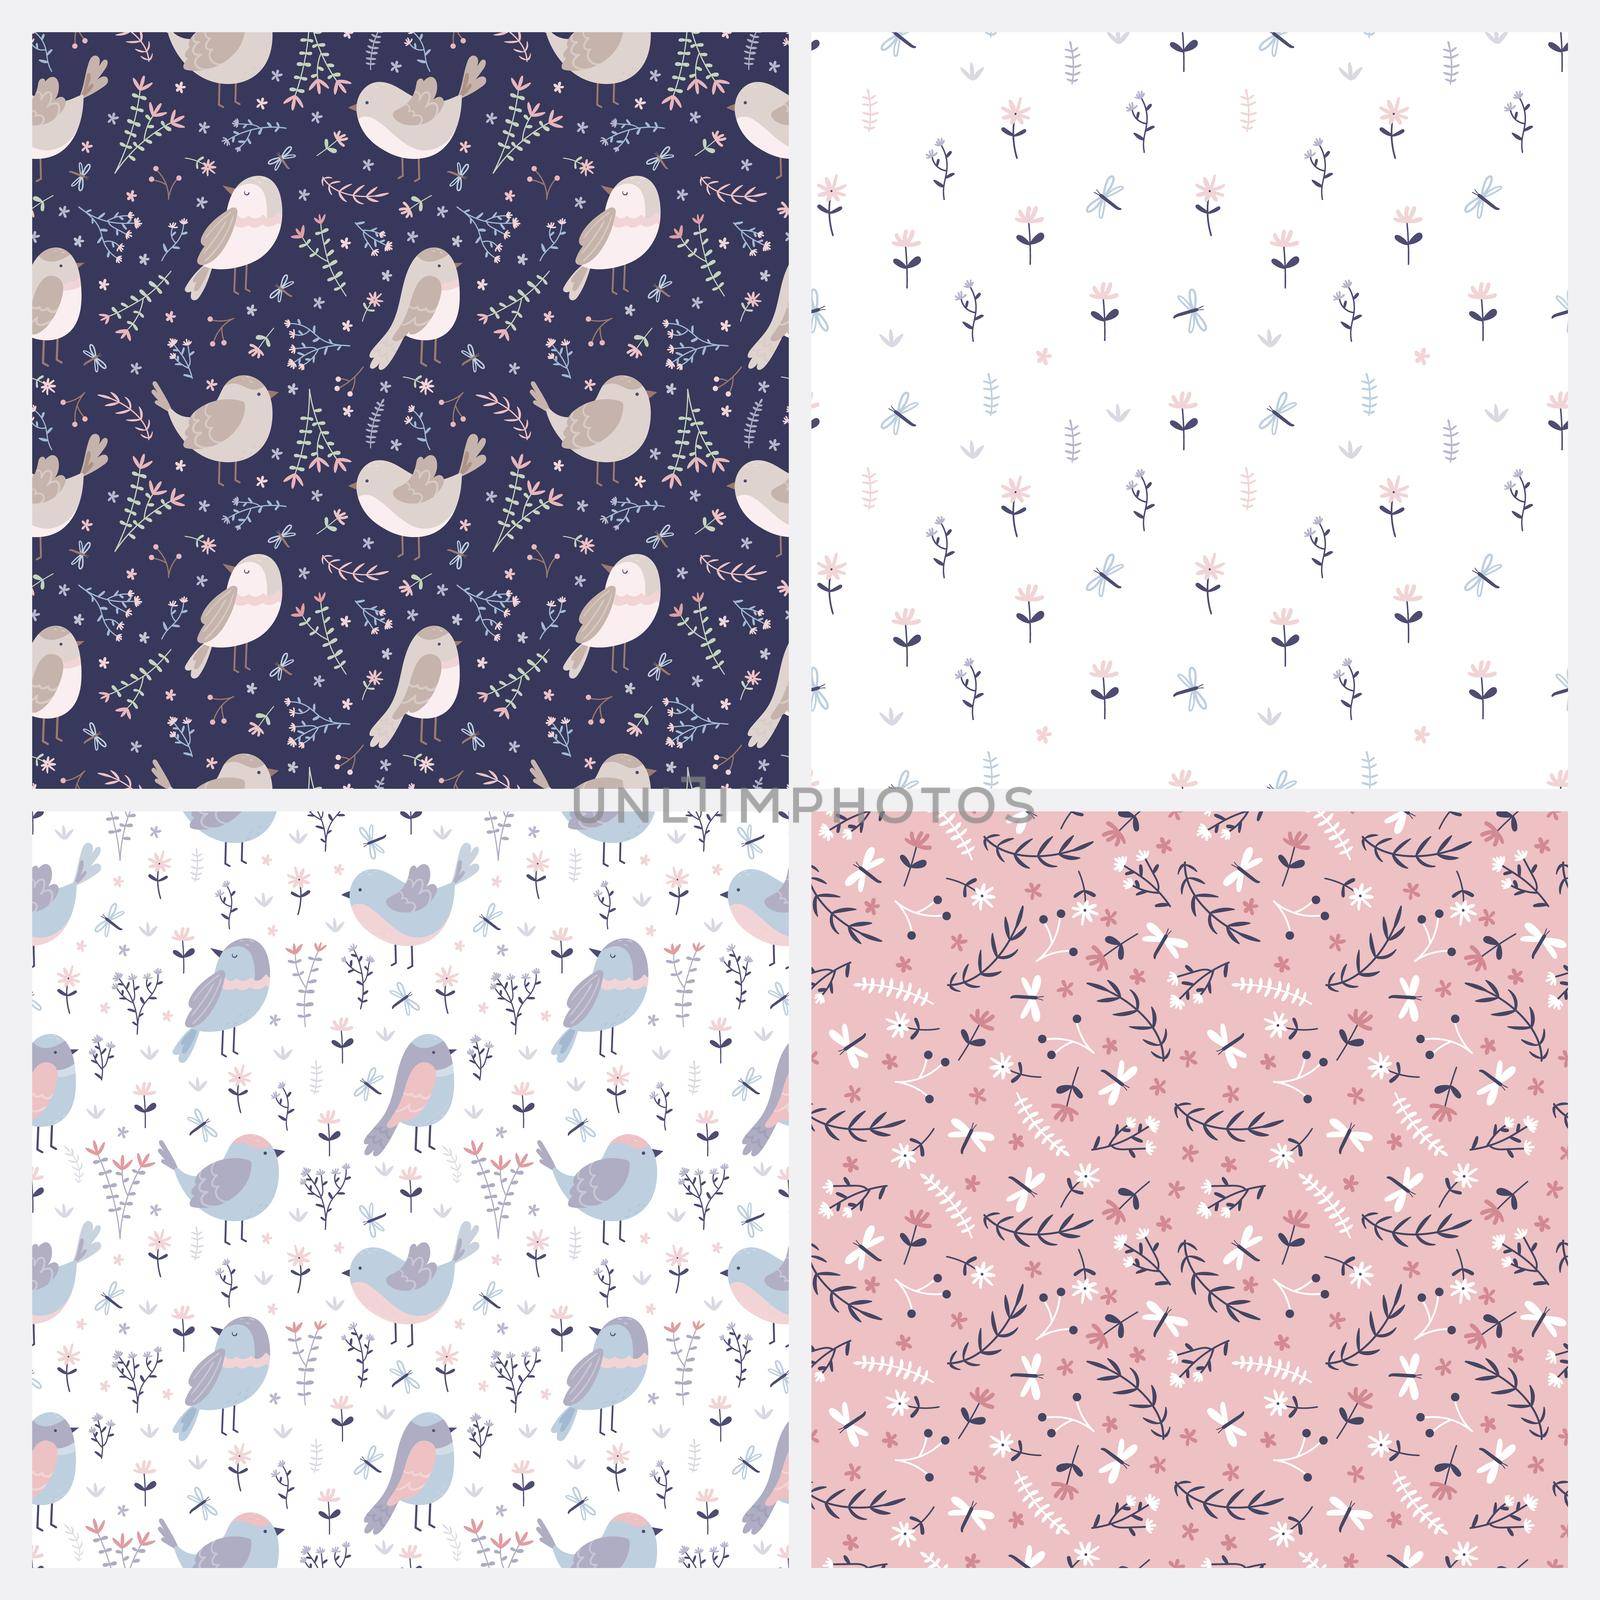 Set of spring seamless patterns with birds, flowers, leaves and dragonflies. Ideal for wallpapers, wrapping paper, fabrics. Vector illustration in Scandinavian style.